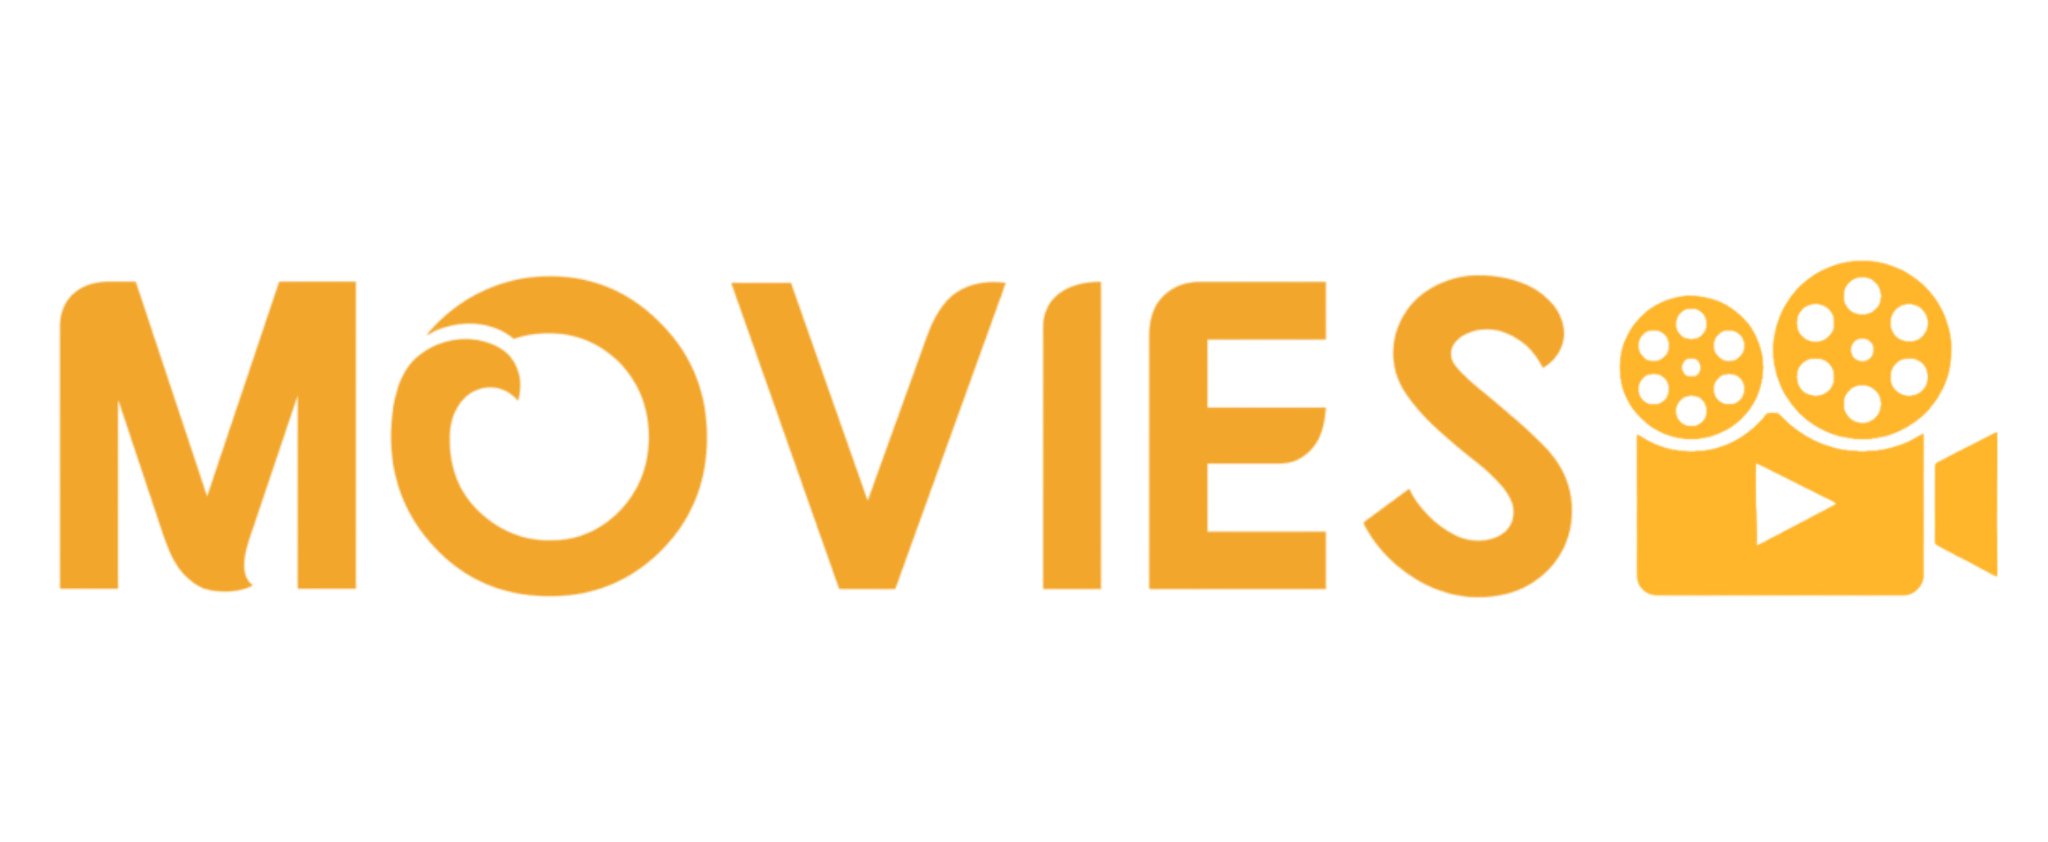 Watch Online HD Movies and TV Shows / Series Moviesbox.net